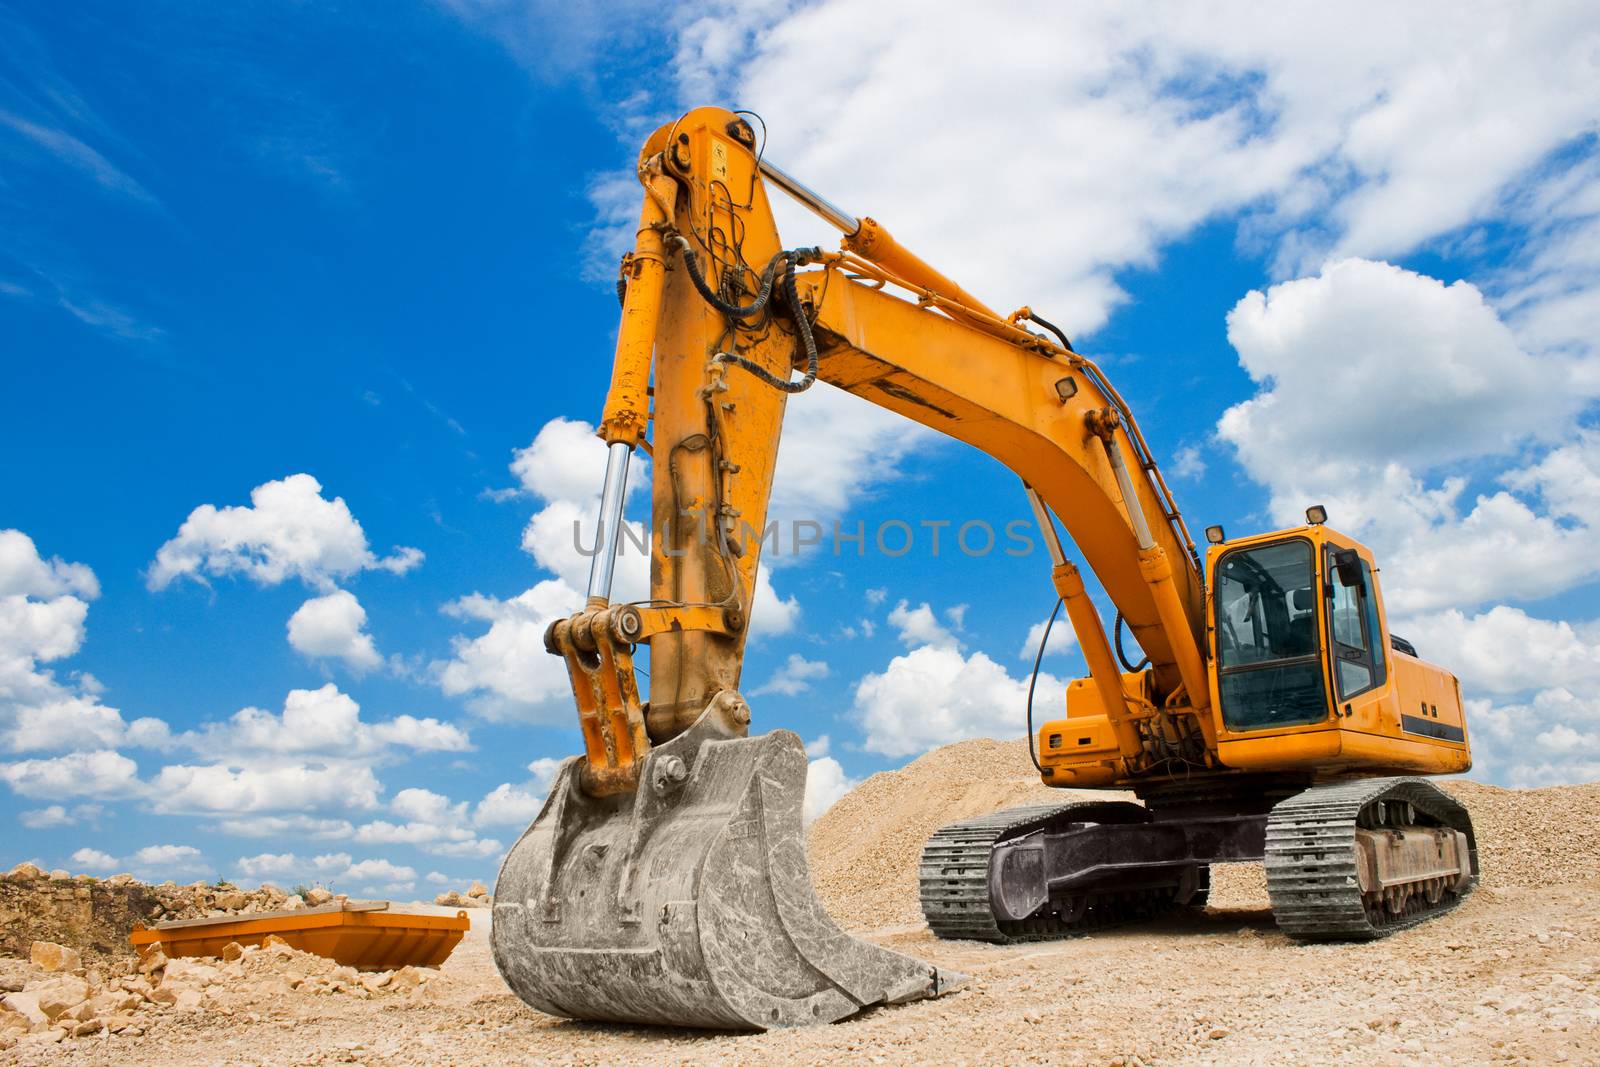 Yellow excavator on a construction site against blue sky by jordanrusev